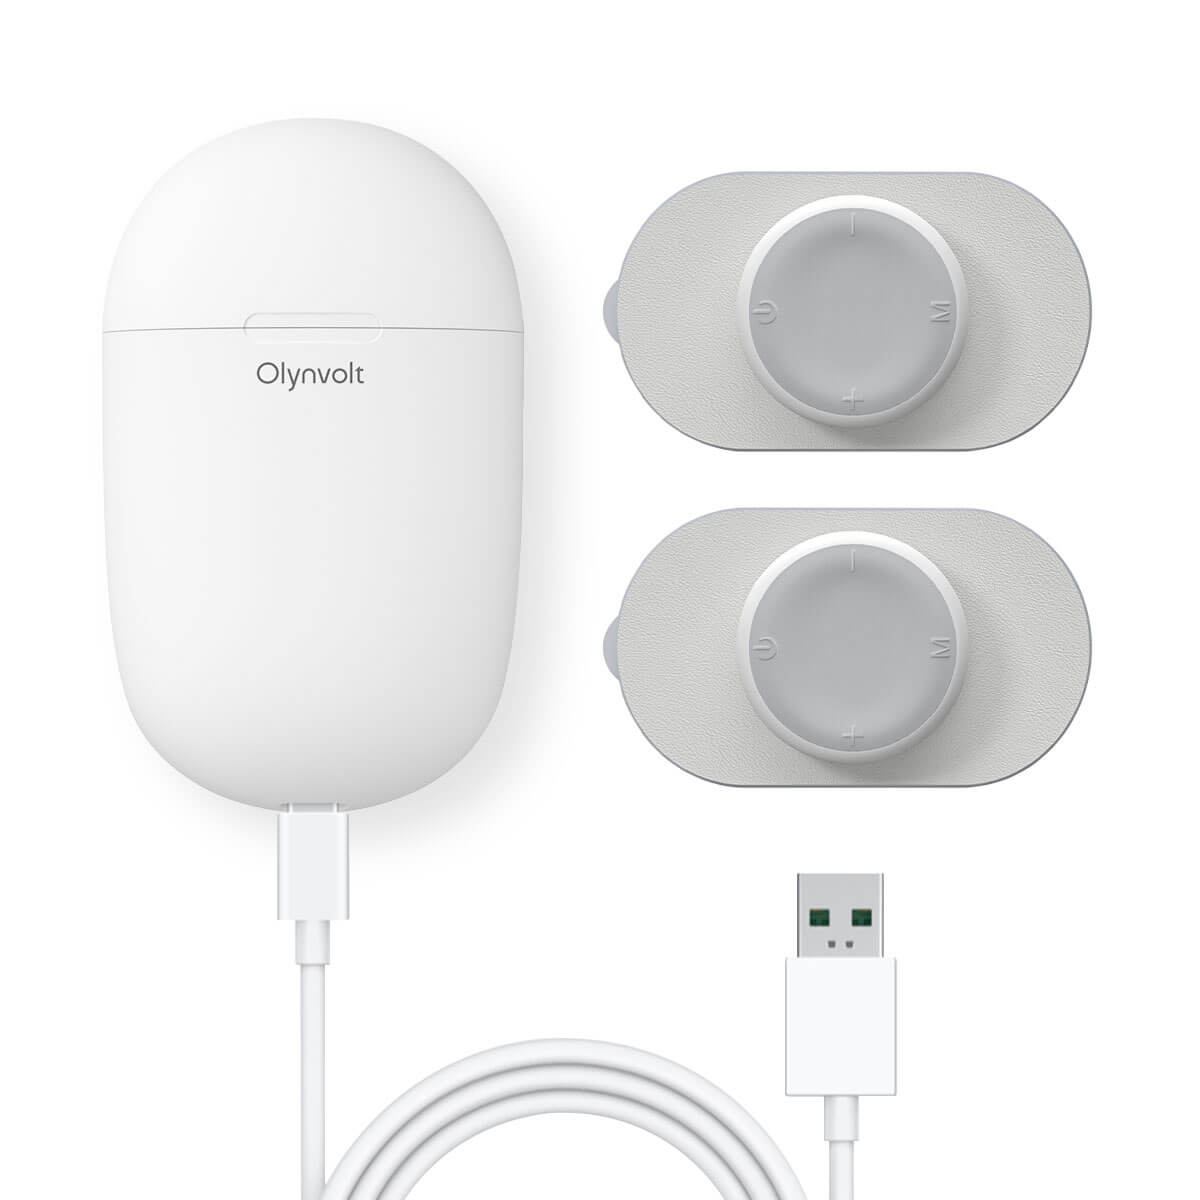 Olynvolt™ Pocket PRO- Portable Powerful Body Relief Device